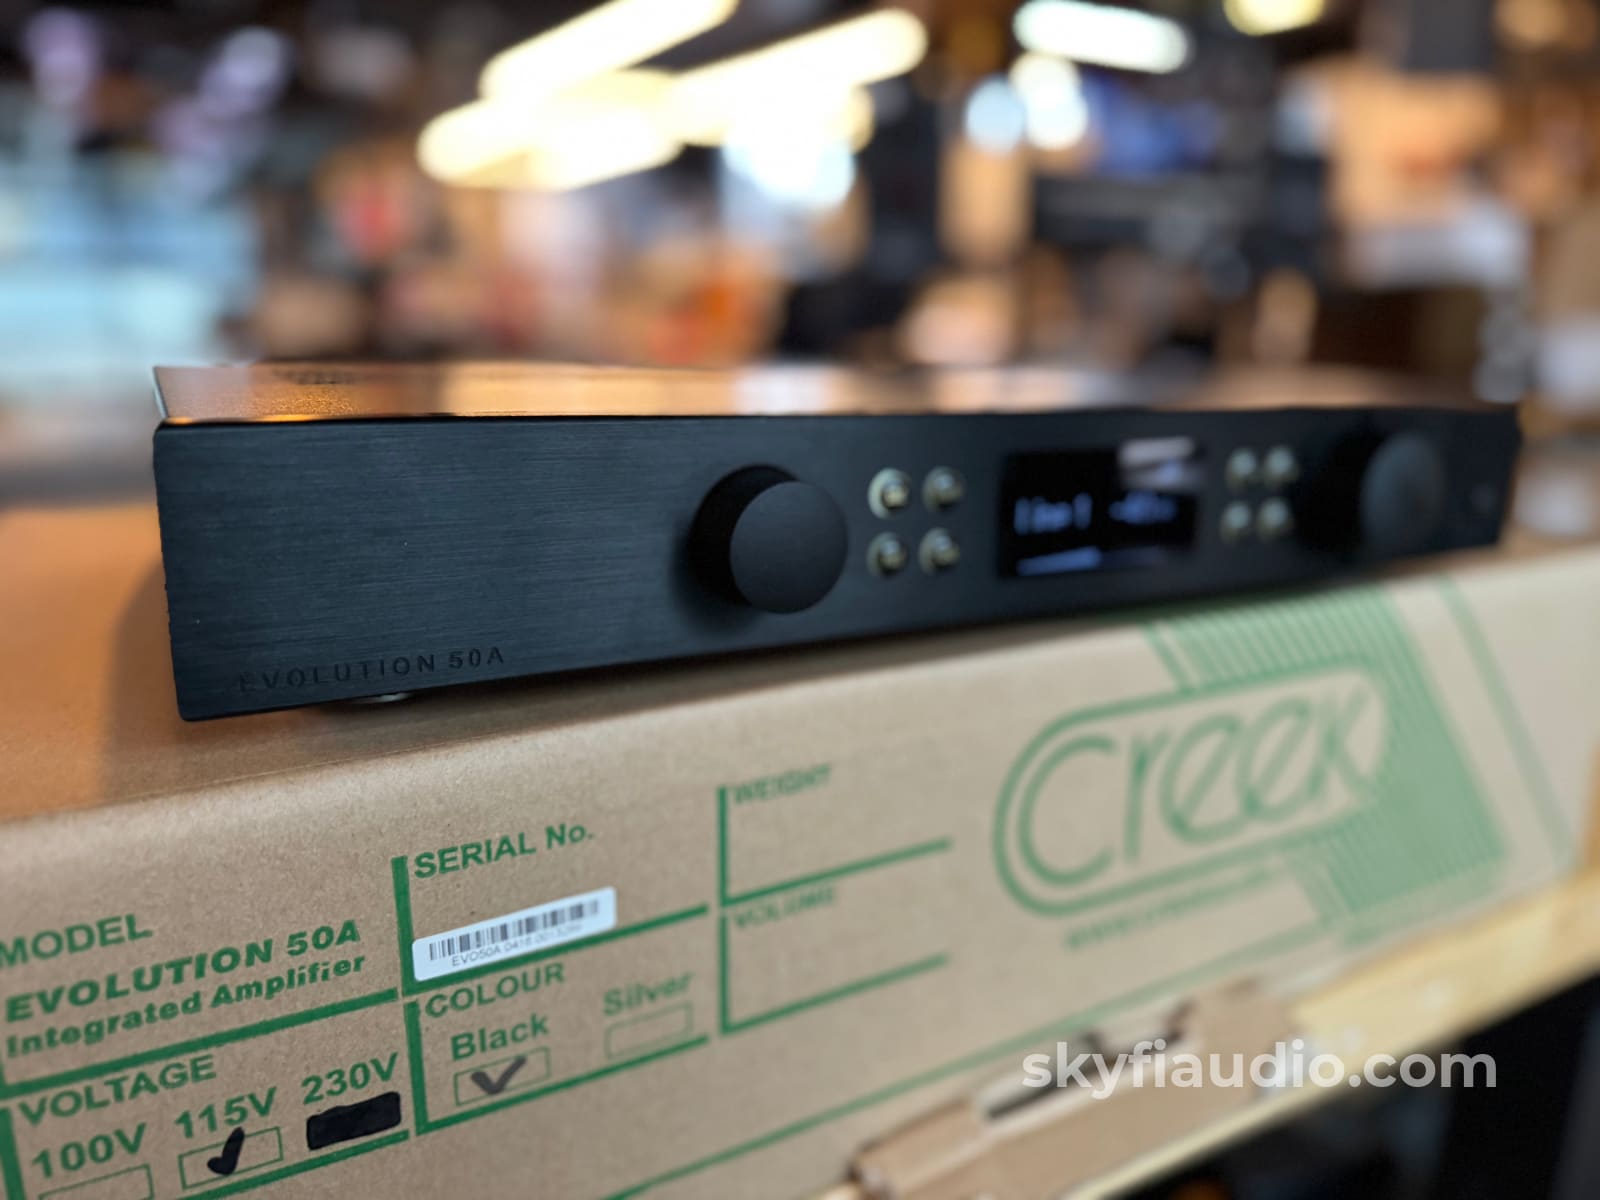 Creek Evolution 50 A Integrated Amp W/ Ruby 2 Dac Module - Complete Amplifier